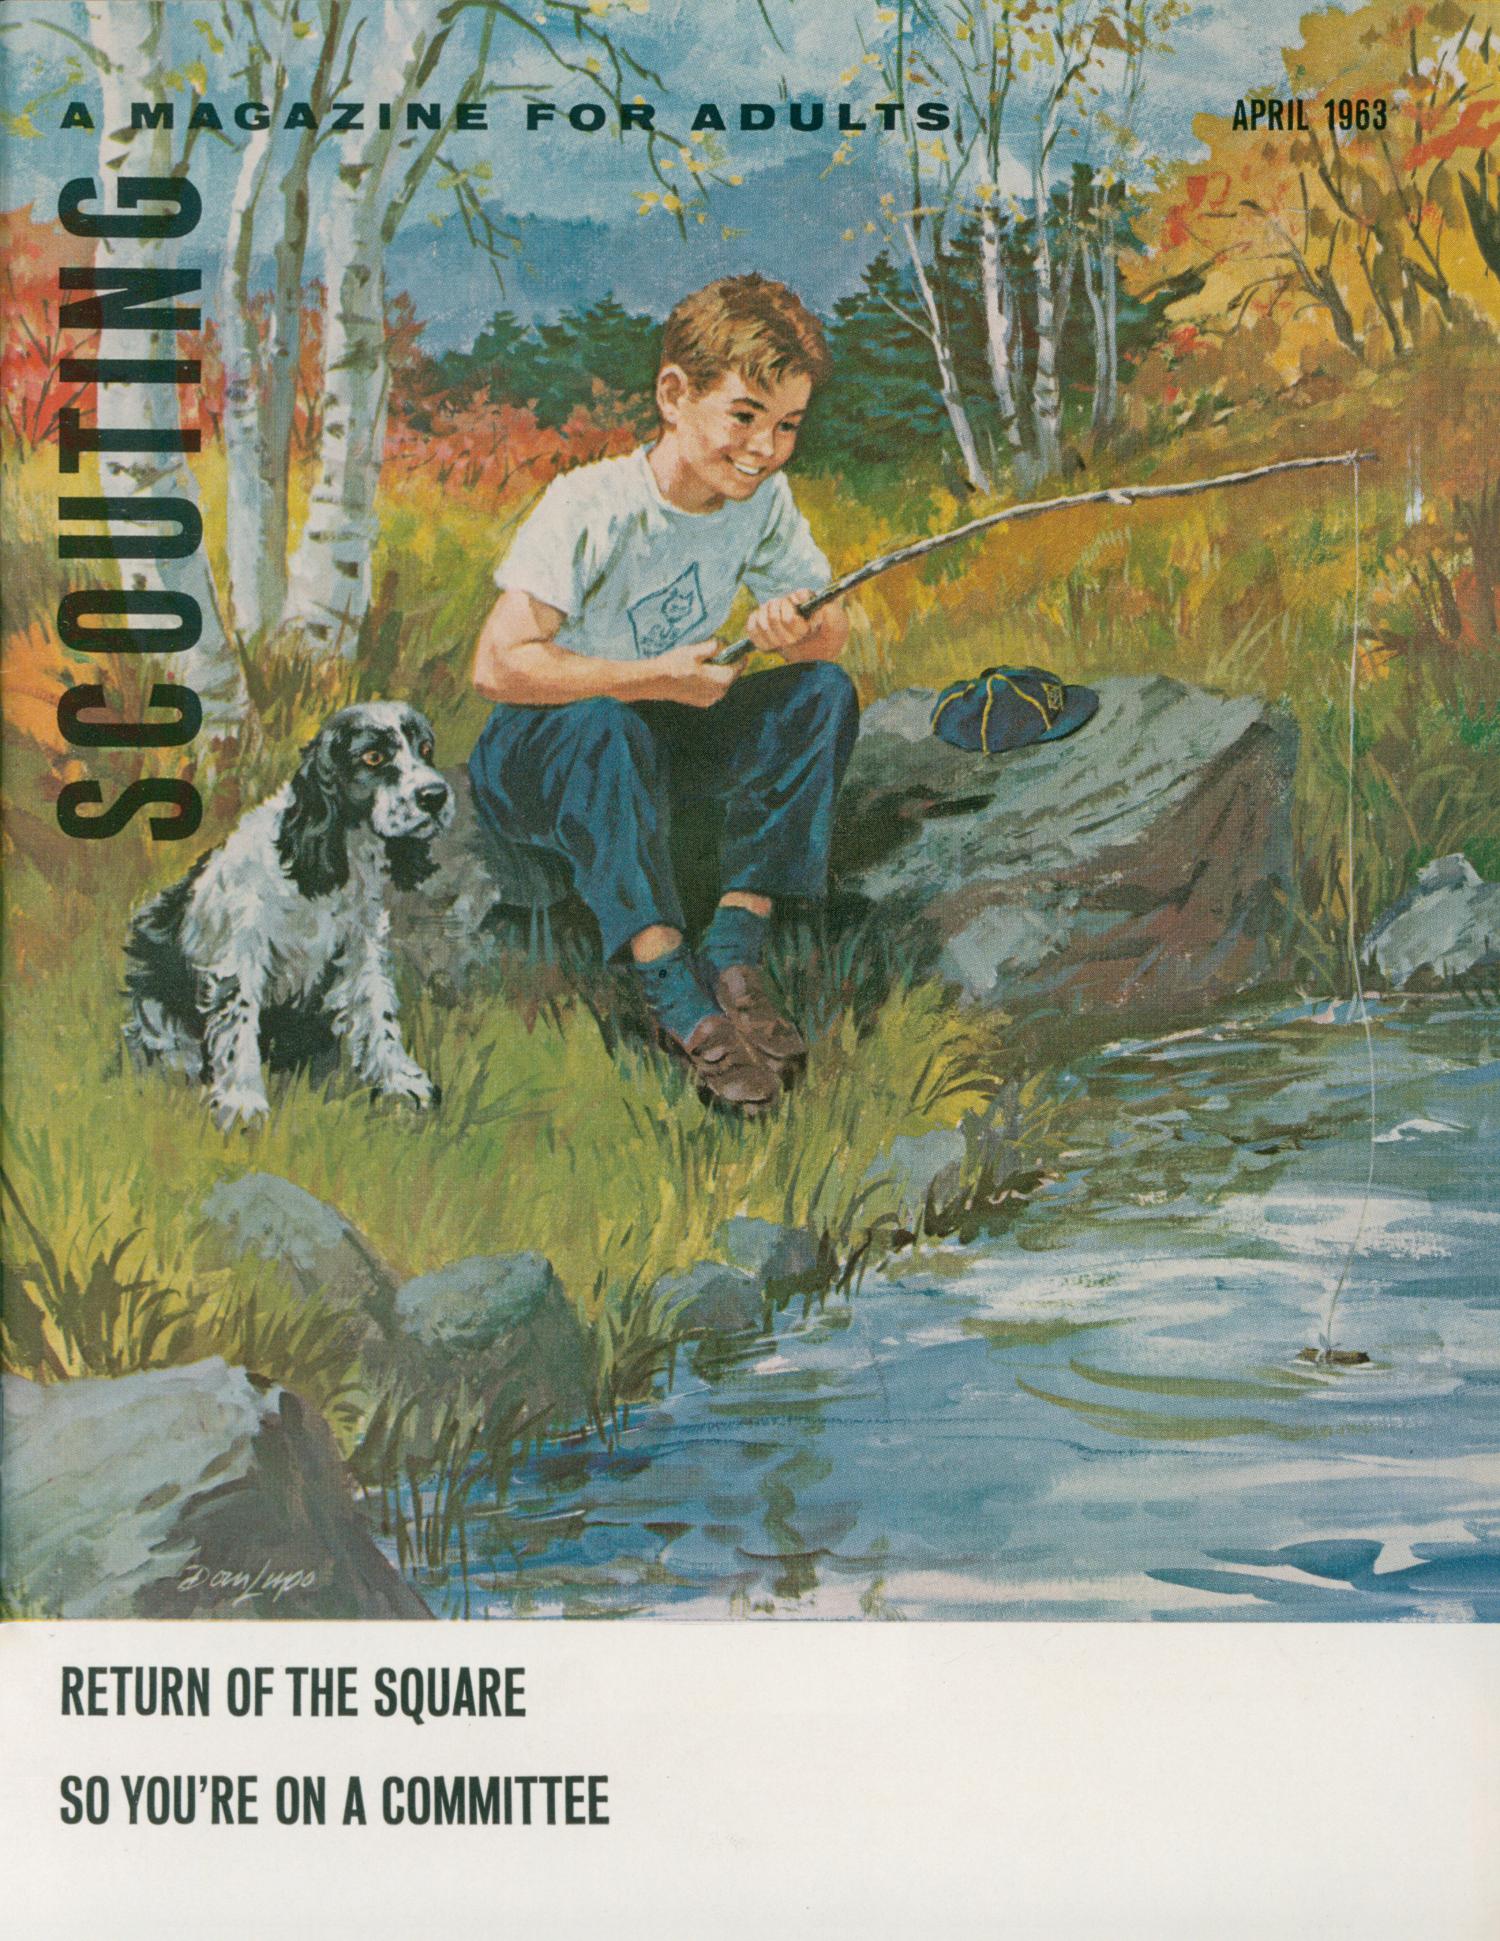 Scouting, Volume 51, Number 4, April 1963
                                                
                                                    Front Cover
                                                